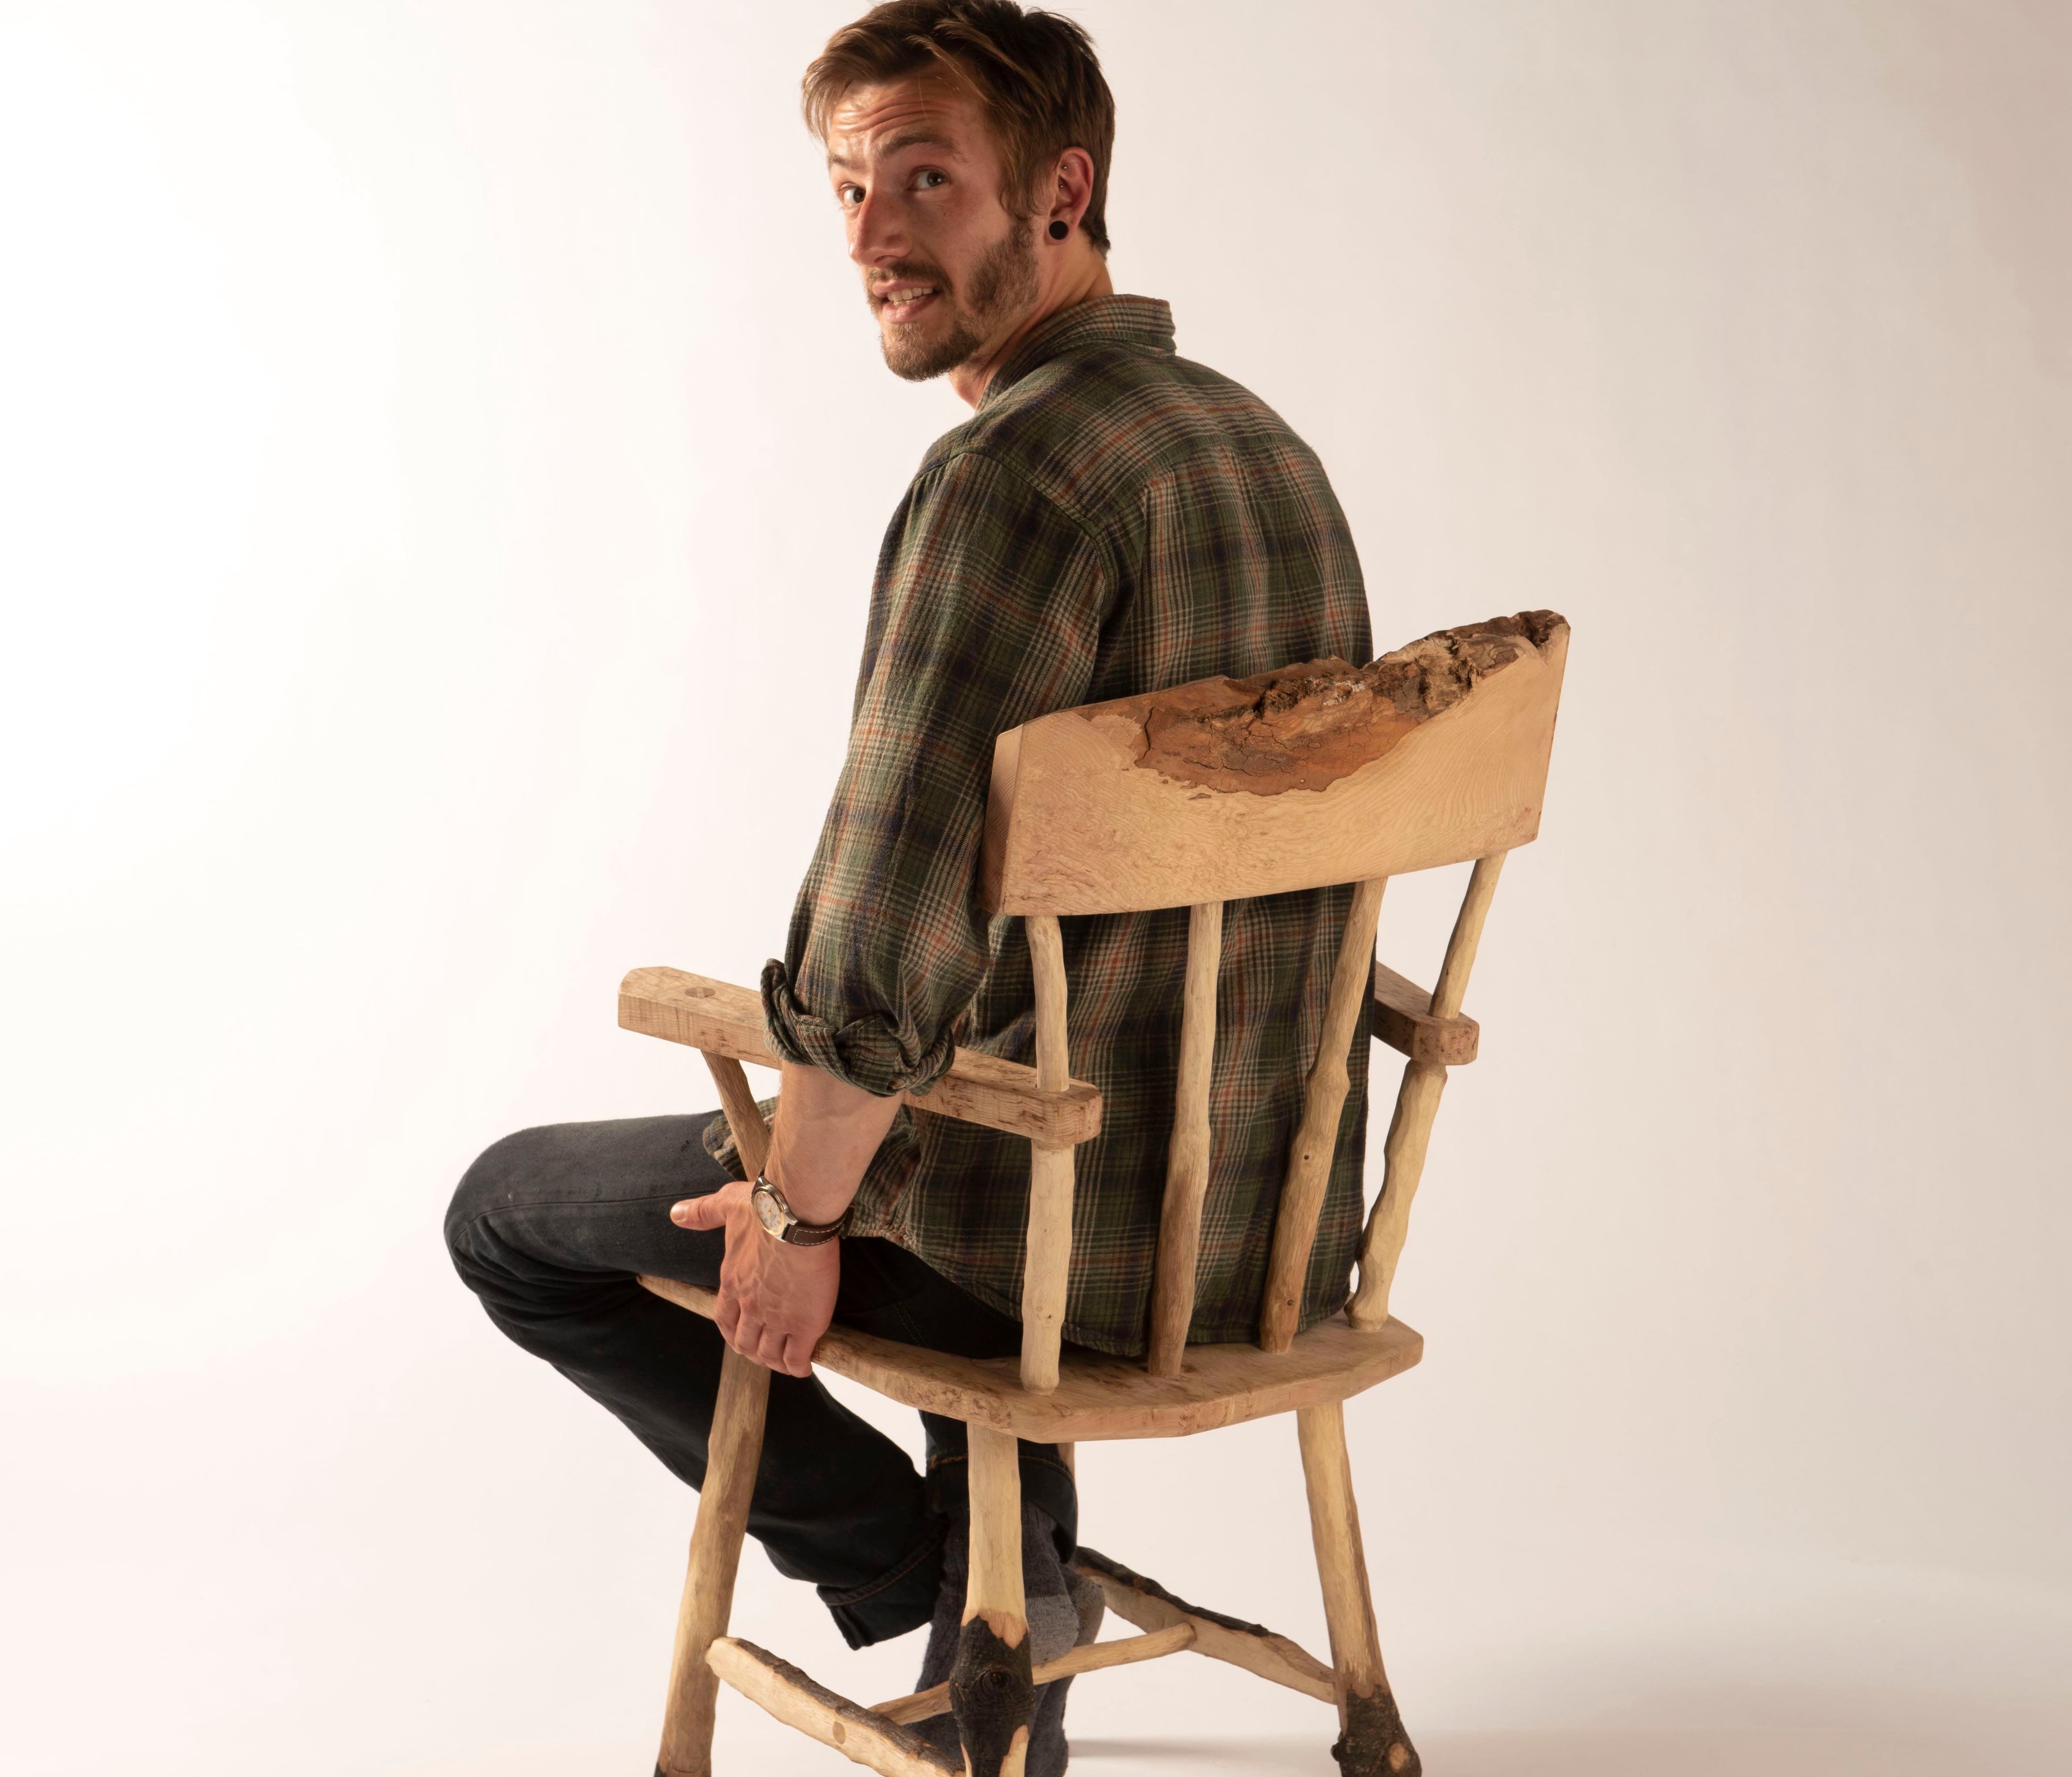 Meet the Artisan: Wood crafter and maker of furniture and homeware, Dan Howey